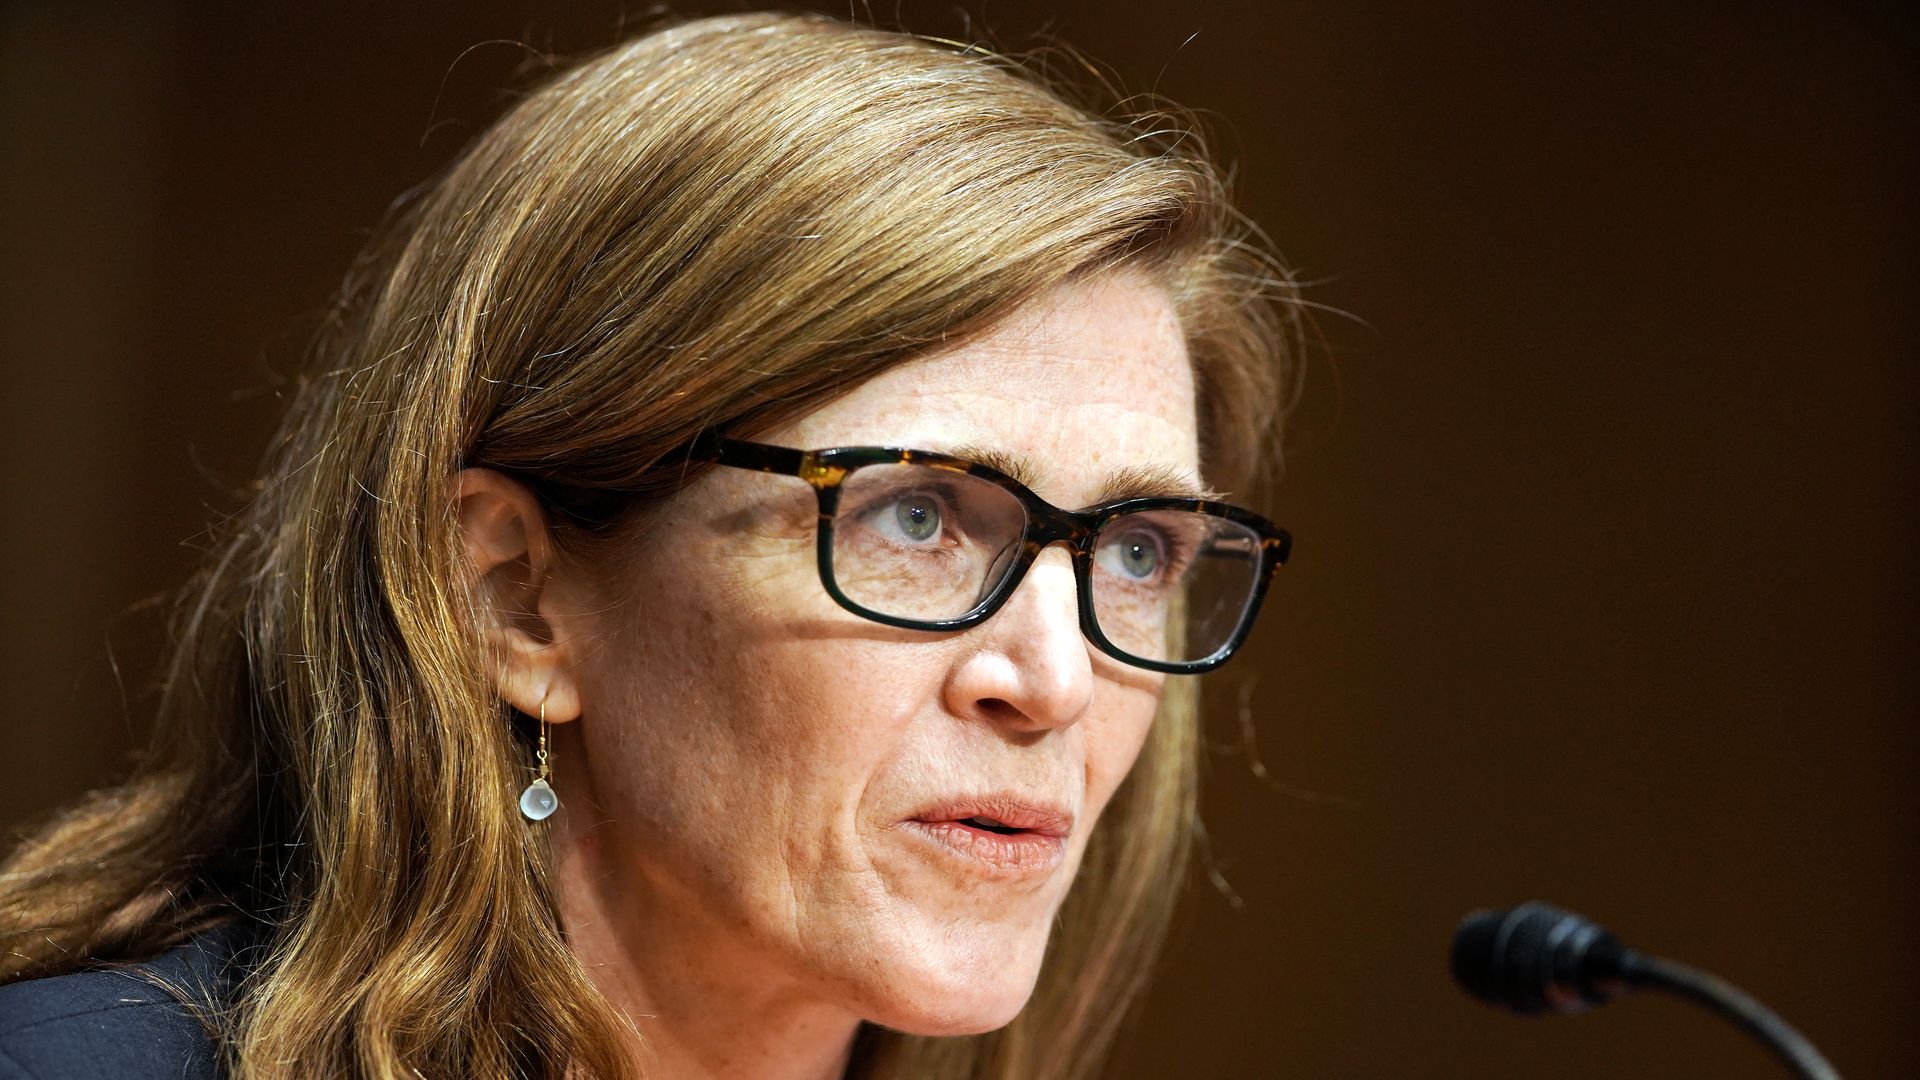 Samantha Power, wearing glasses, speaks into a microphone 